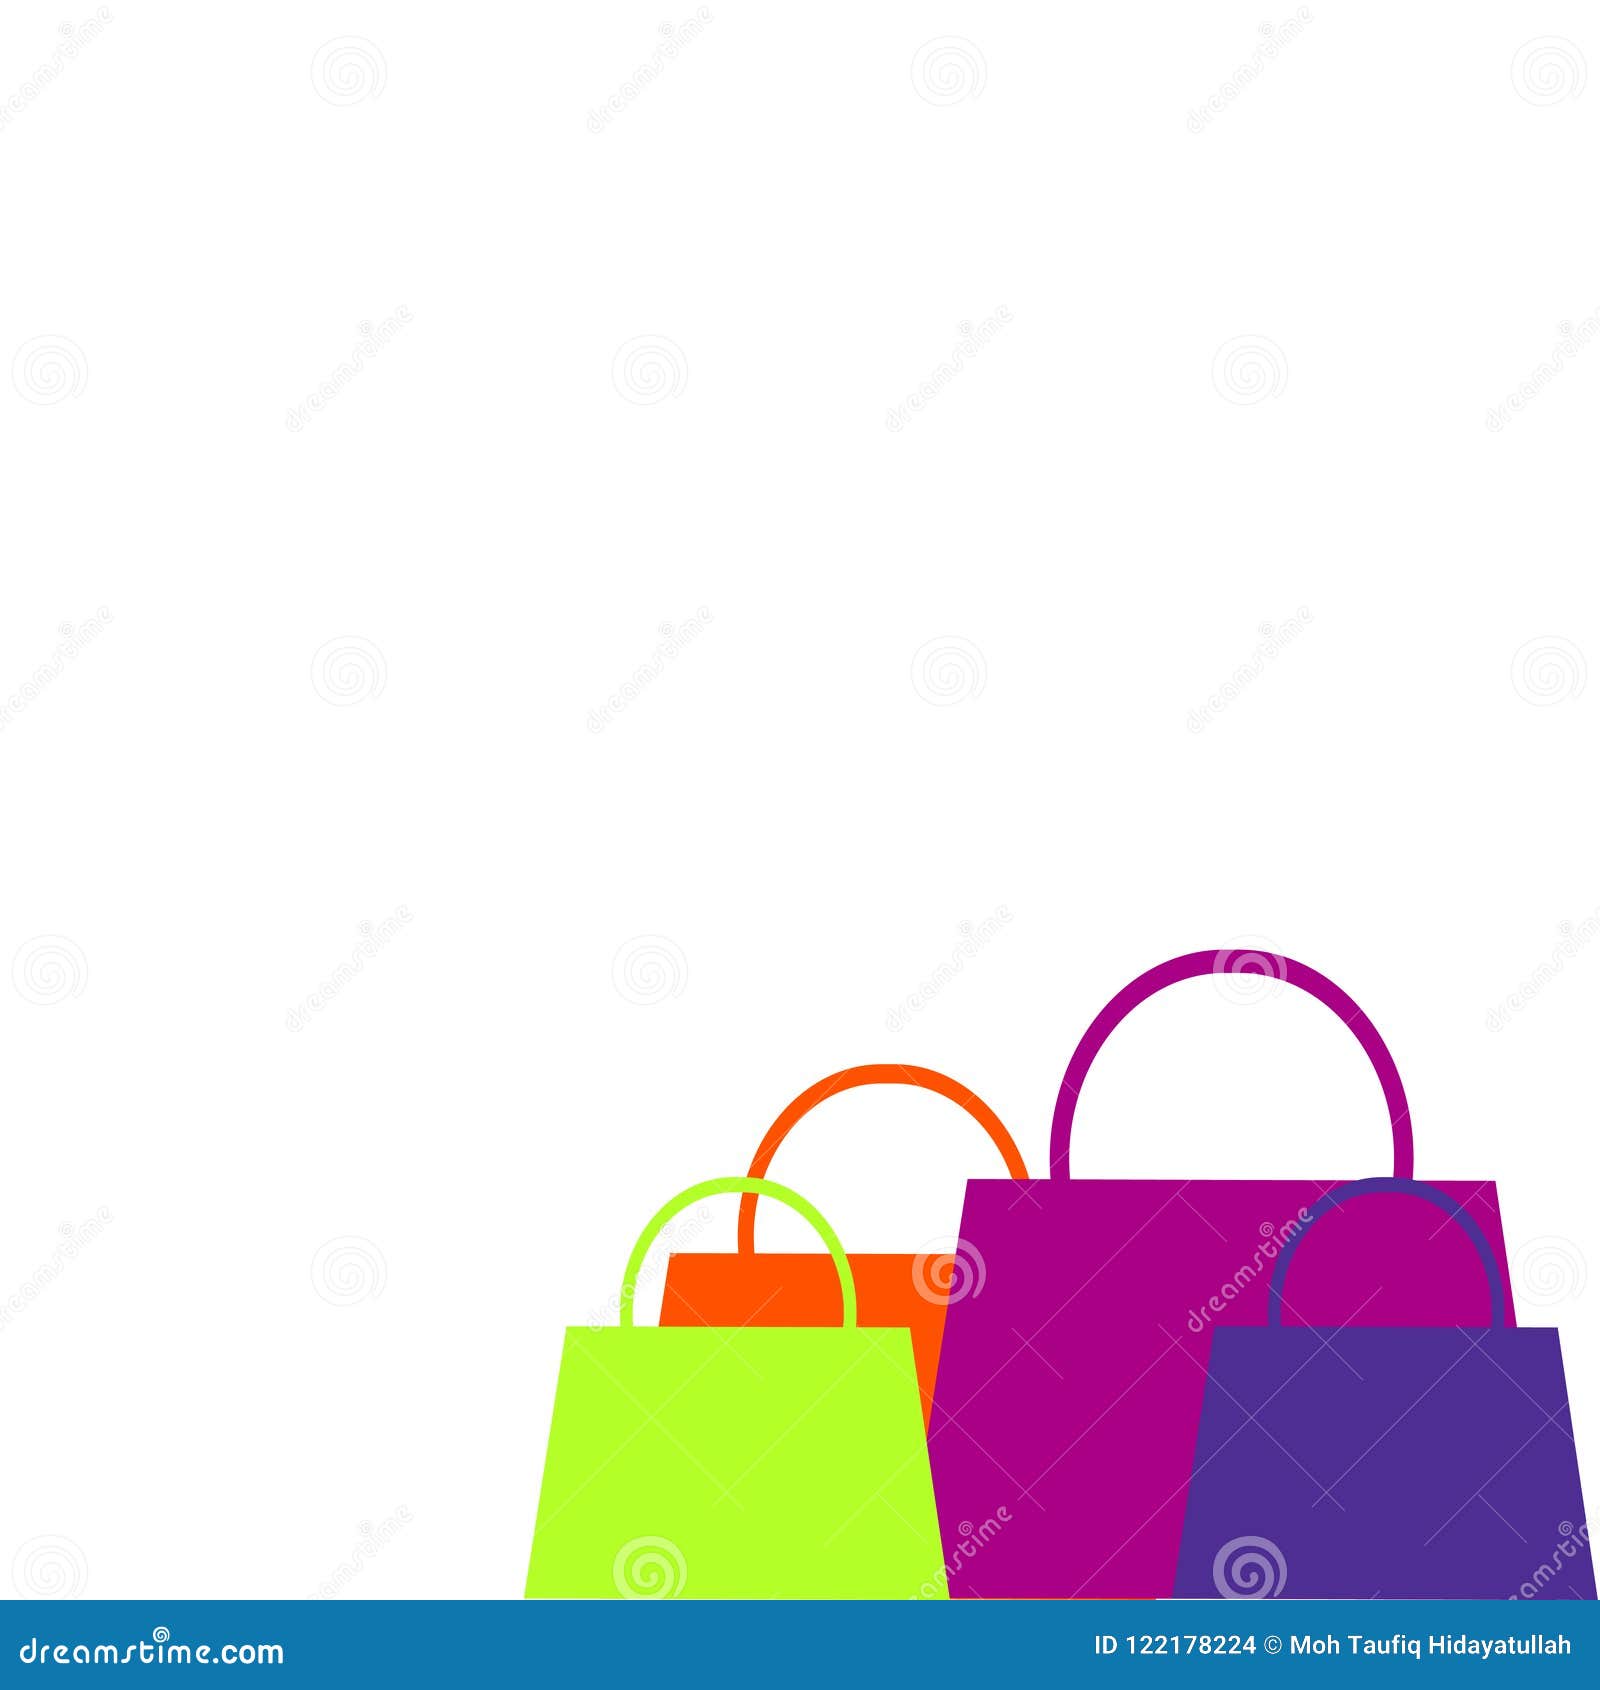 Premium Vector  Shopping bags seamless background backdrop for  marketplace or online shop website seasonal sale clearance theme vector  wallpaper or web site background